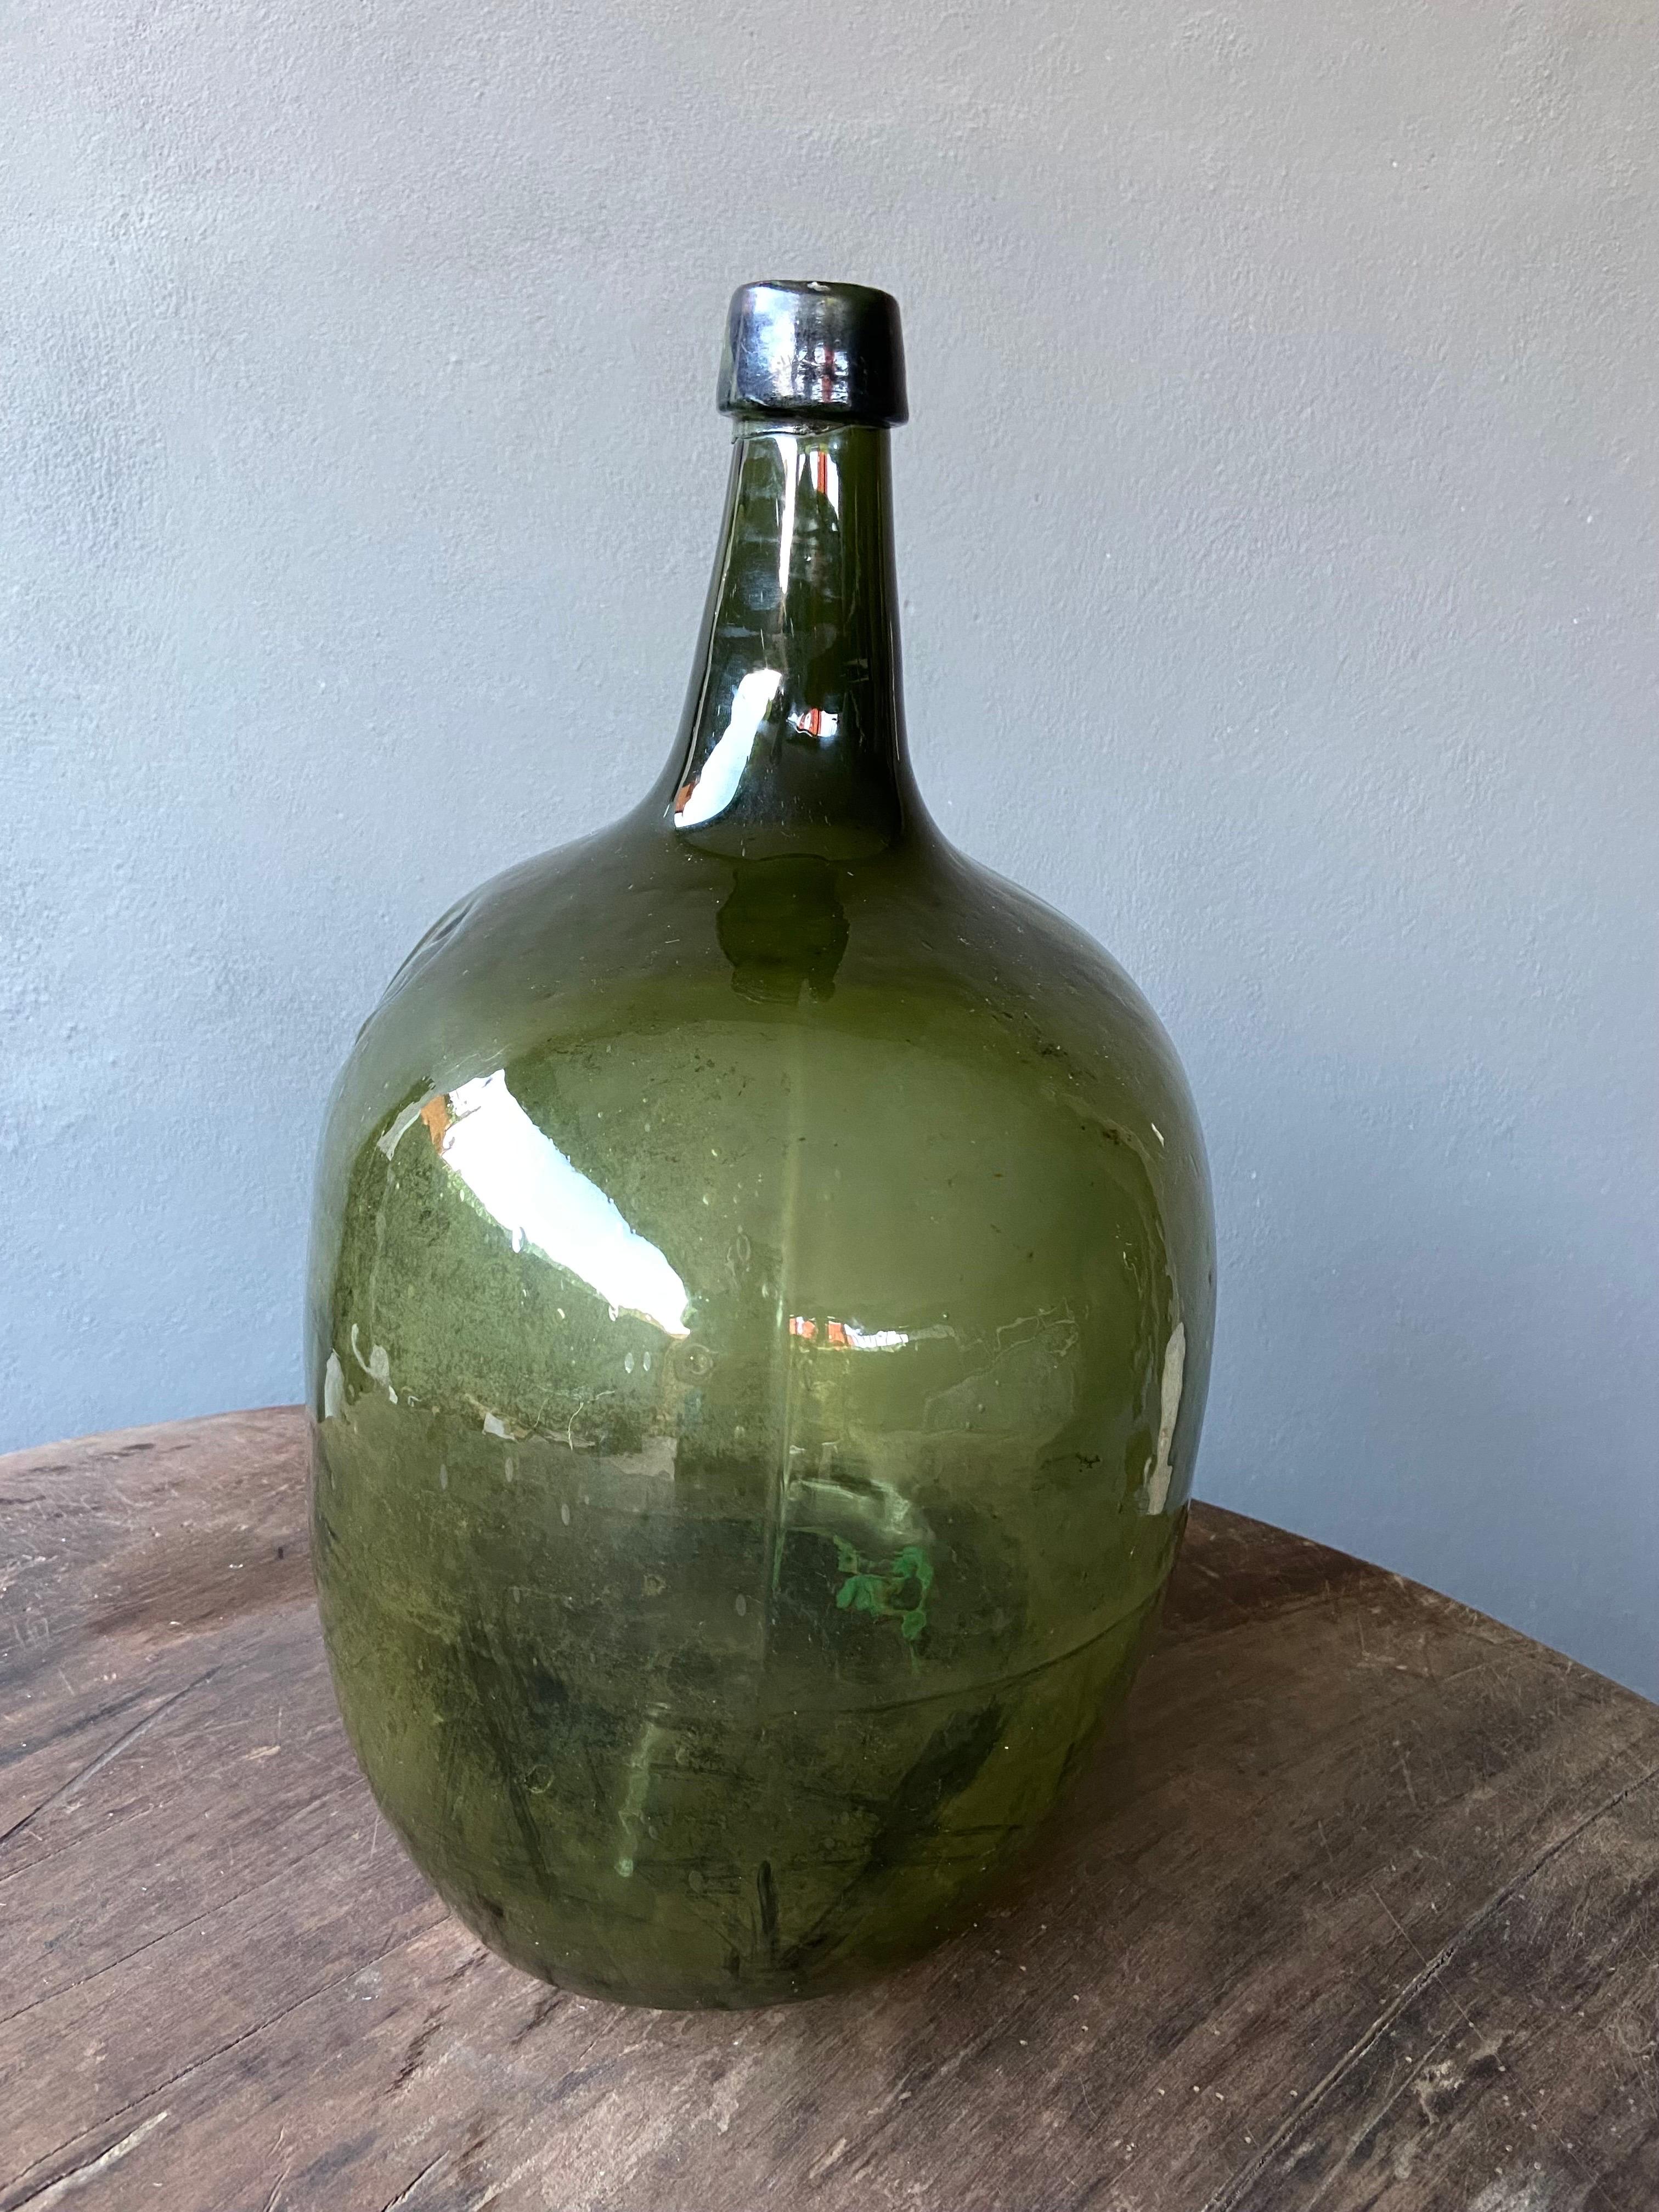 Fired Early 20th Century Demijohn Bottle From Mexico 